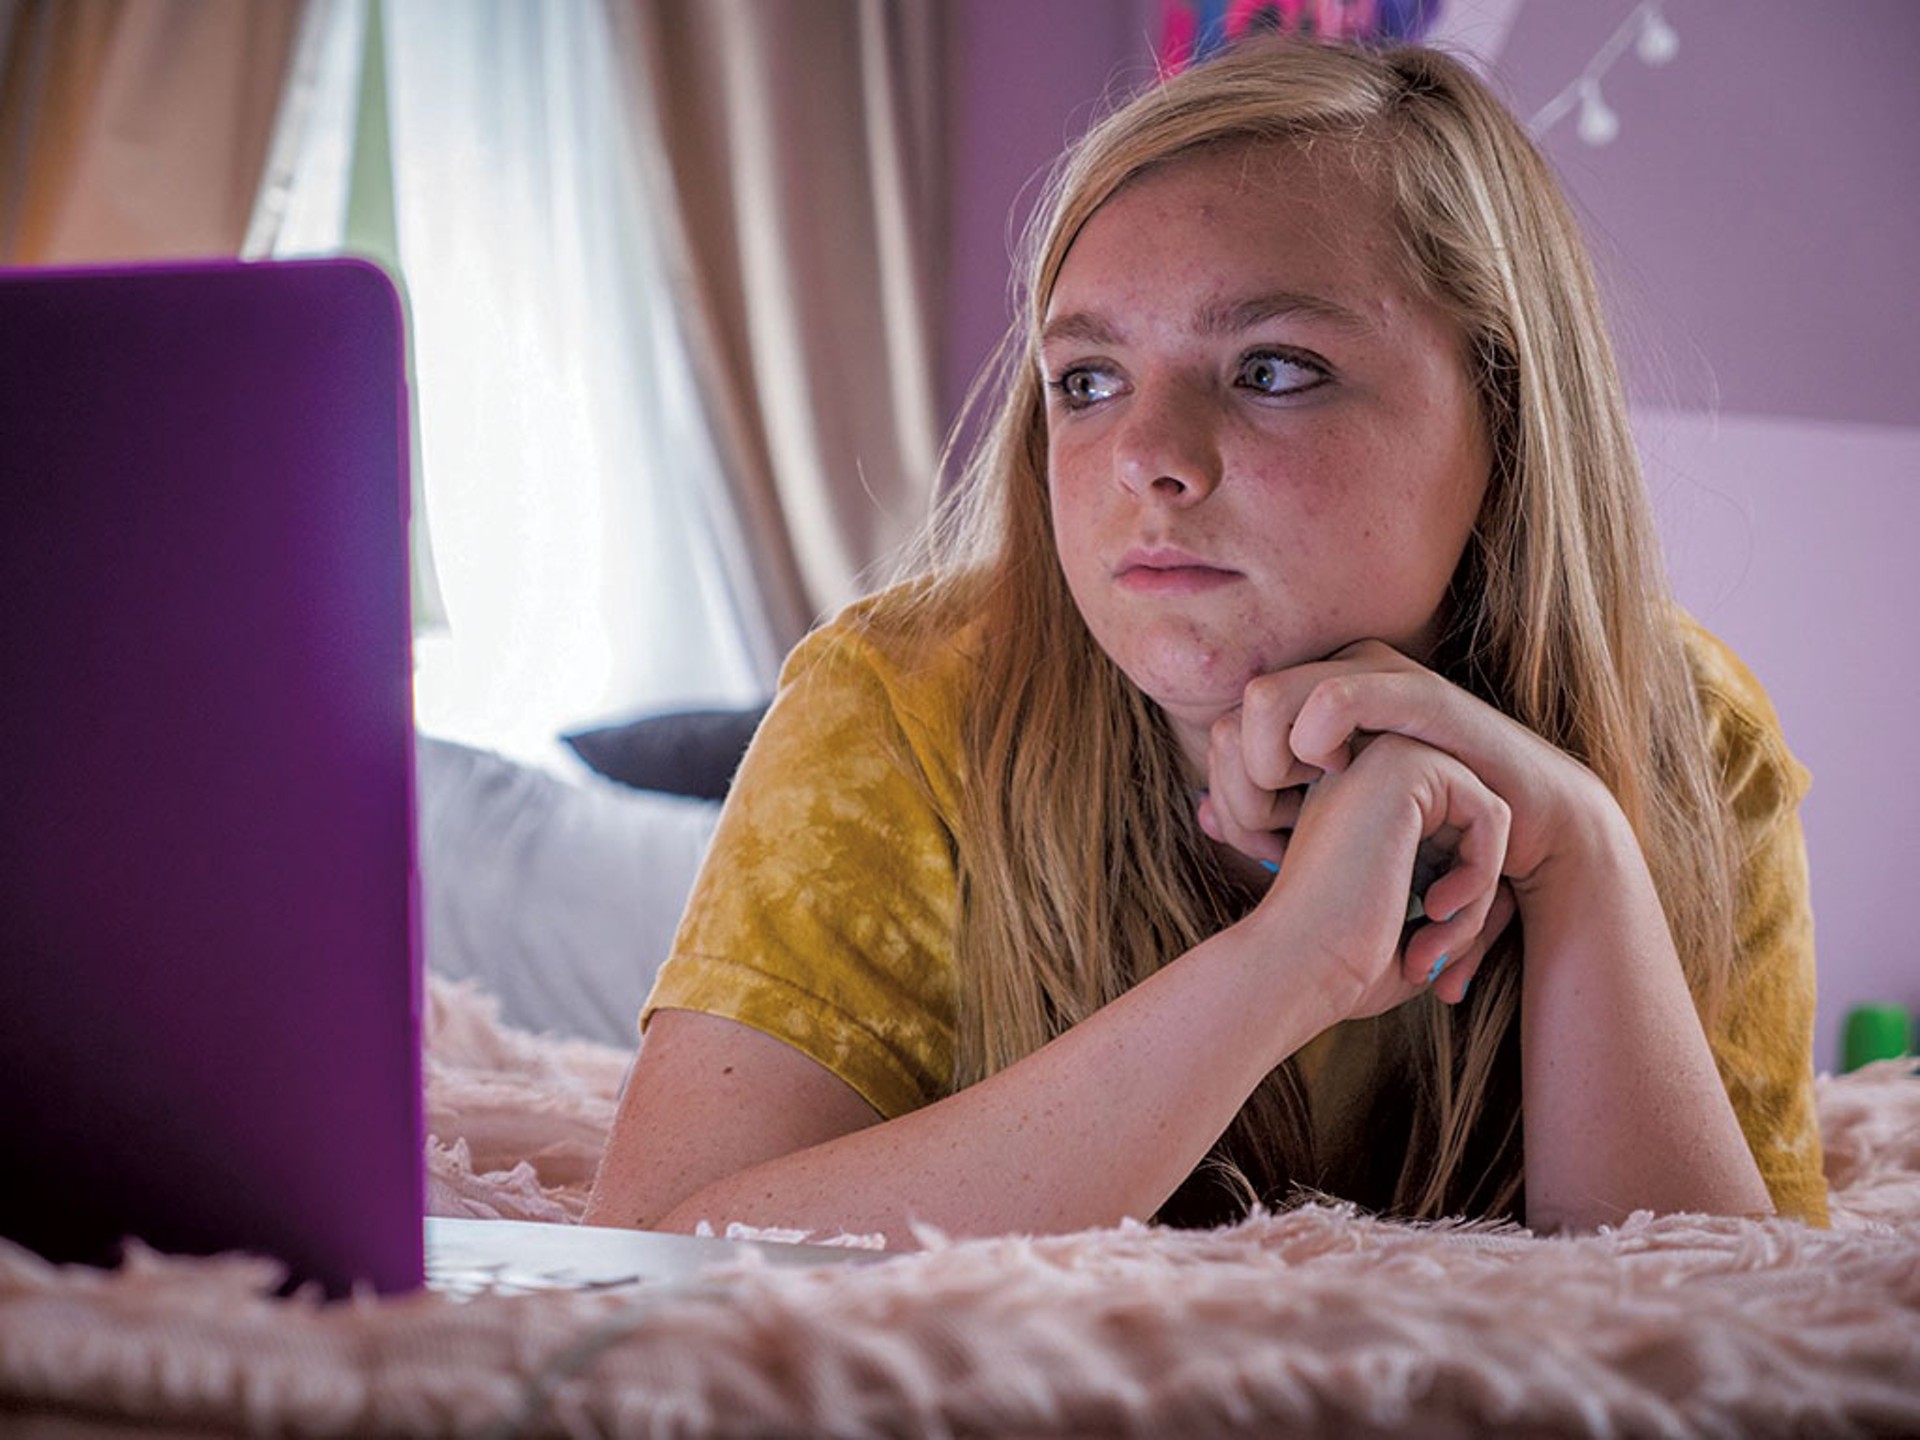 SCREEN SCENE Fisher plays a middle schooler who feels safer online than off- in Burnham’s powerful, sensitive debut feature.